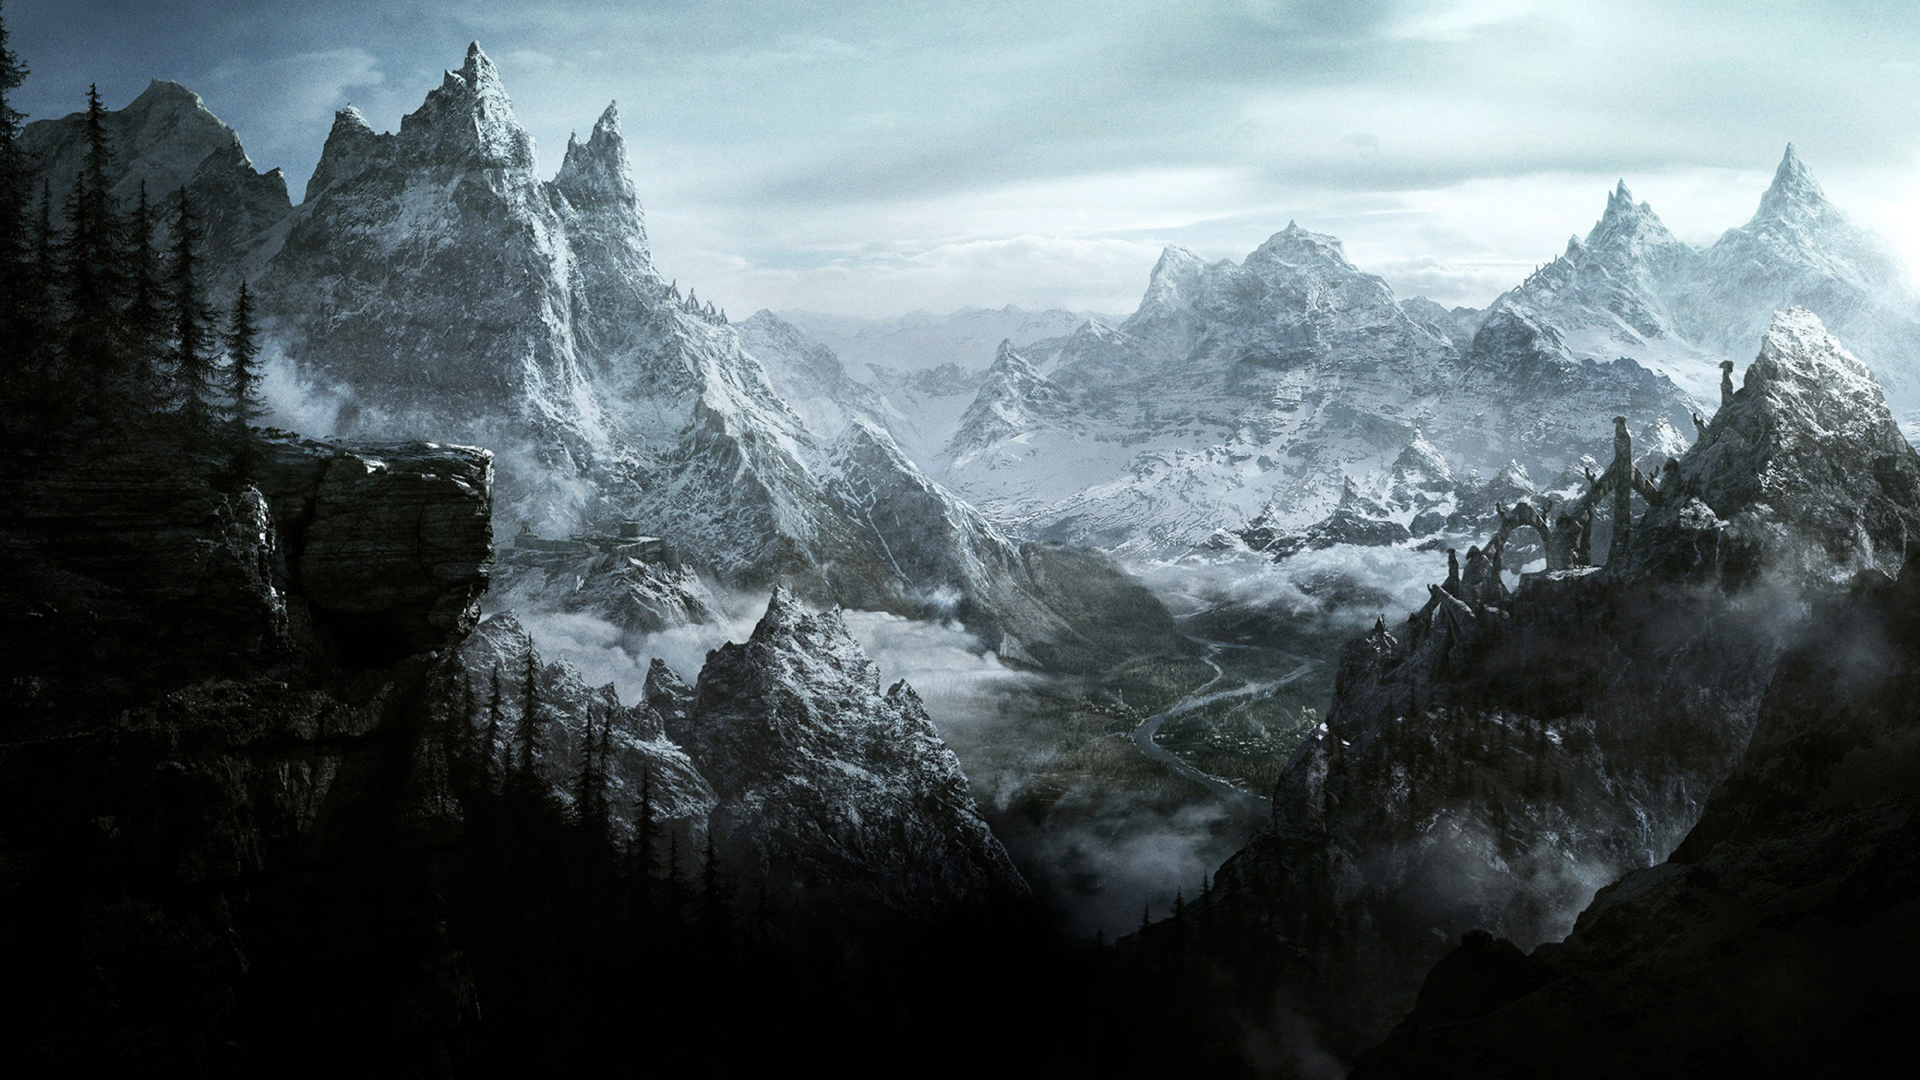 Skyrim Wallpaper HD 1080p Image Amp Pictures Becuo